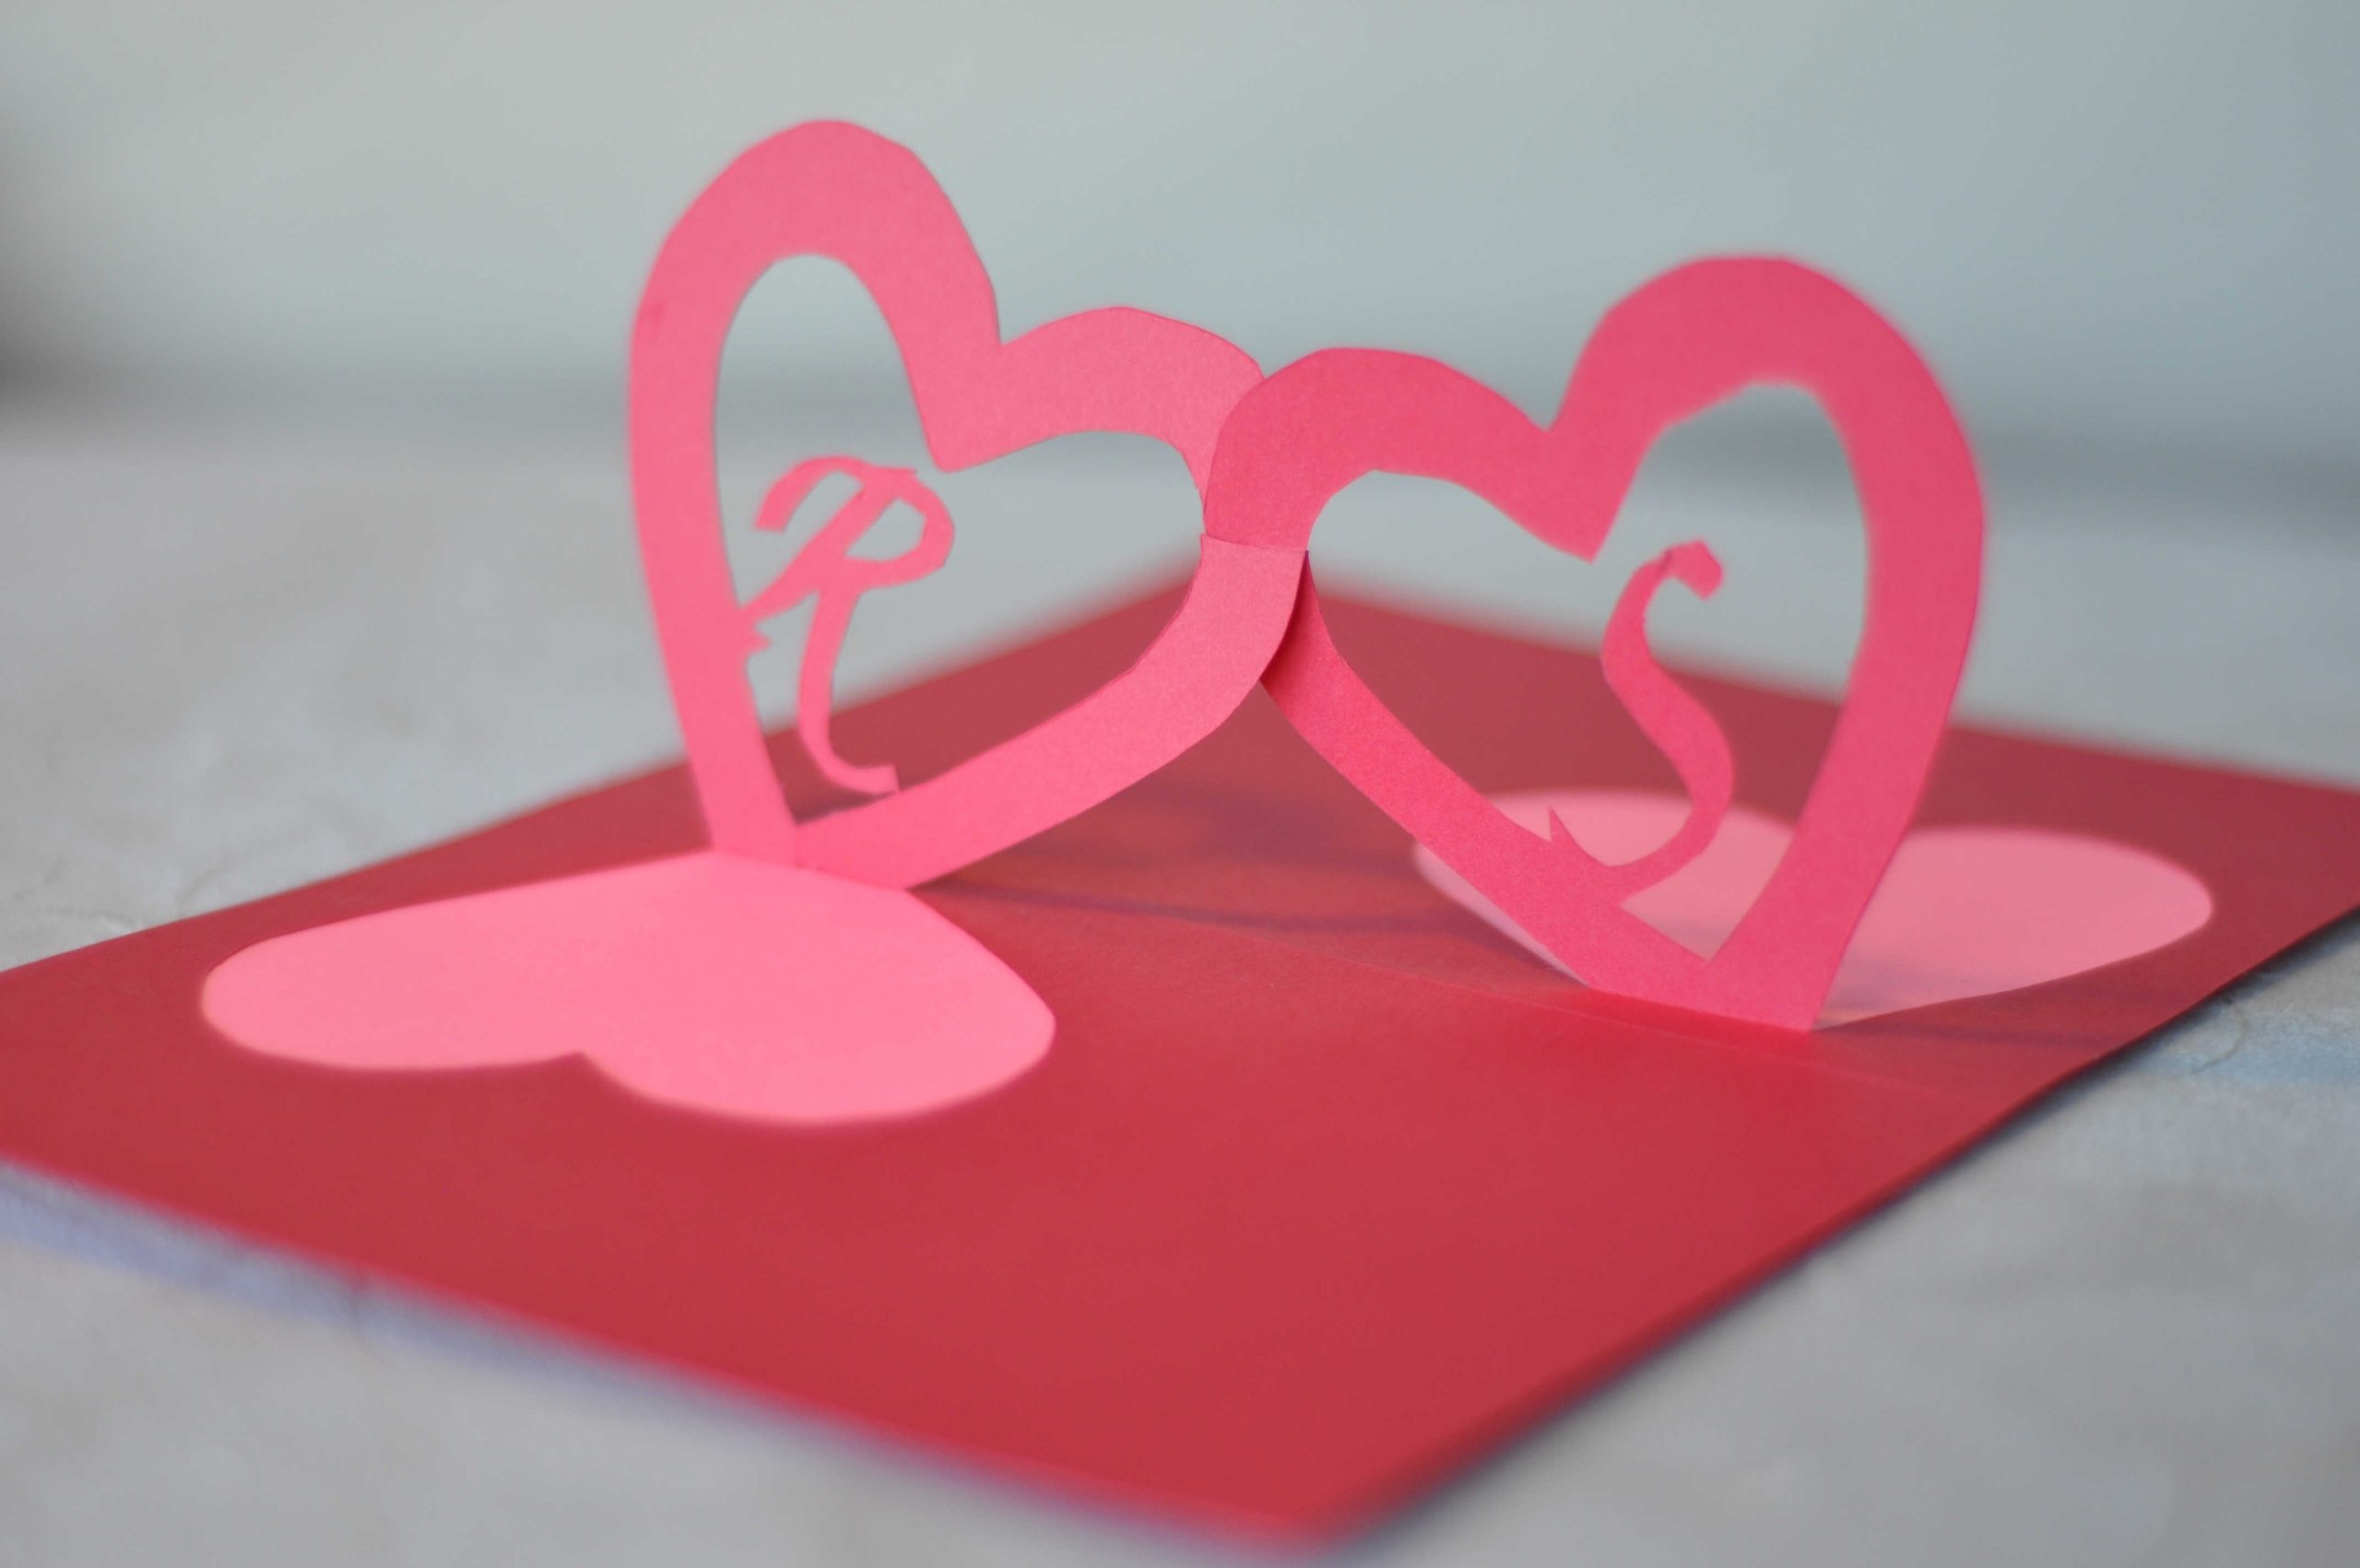 Linked Hearts Pop Up Card Template With Templates For Pop Up Cards Free